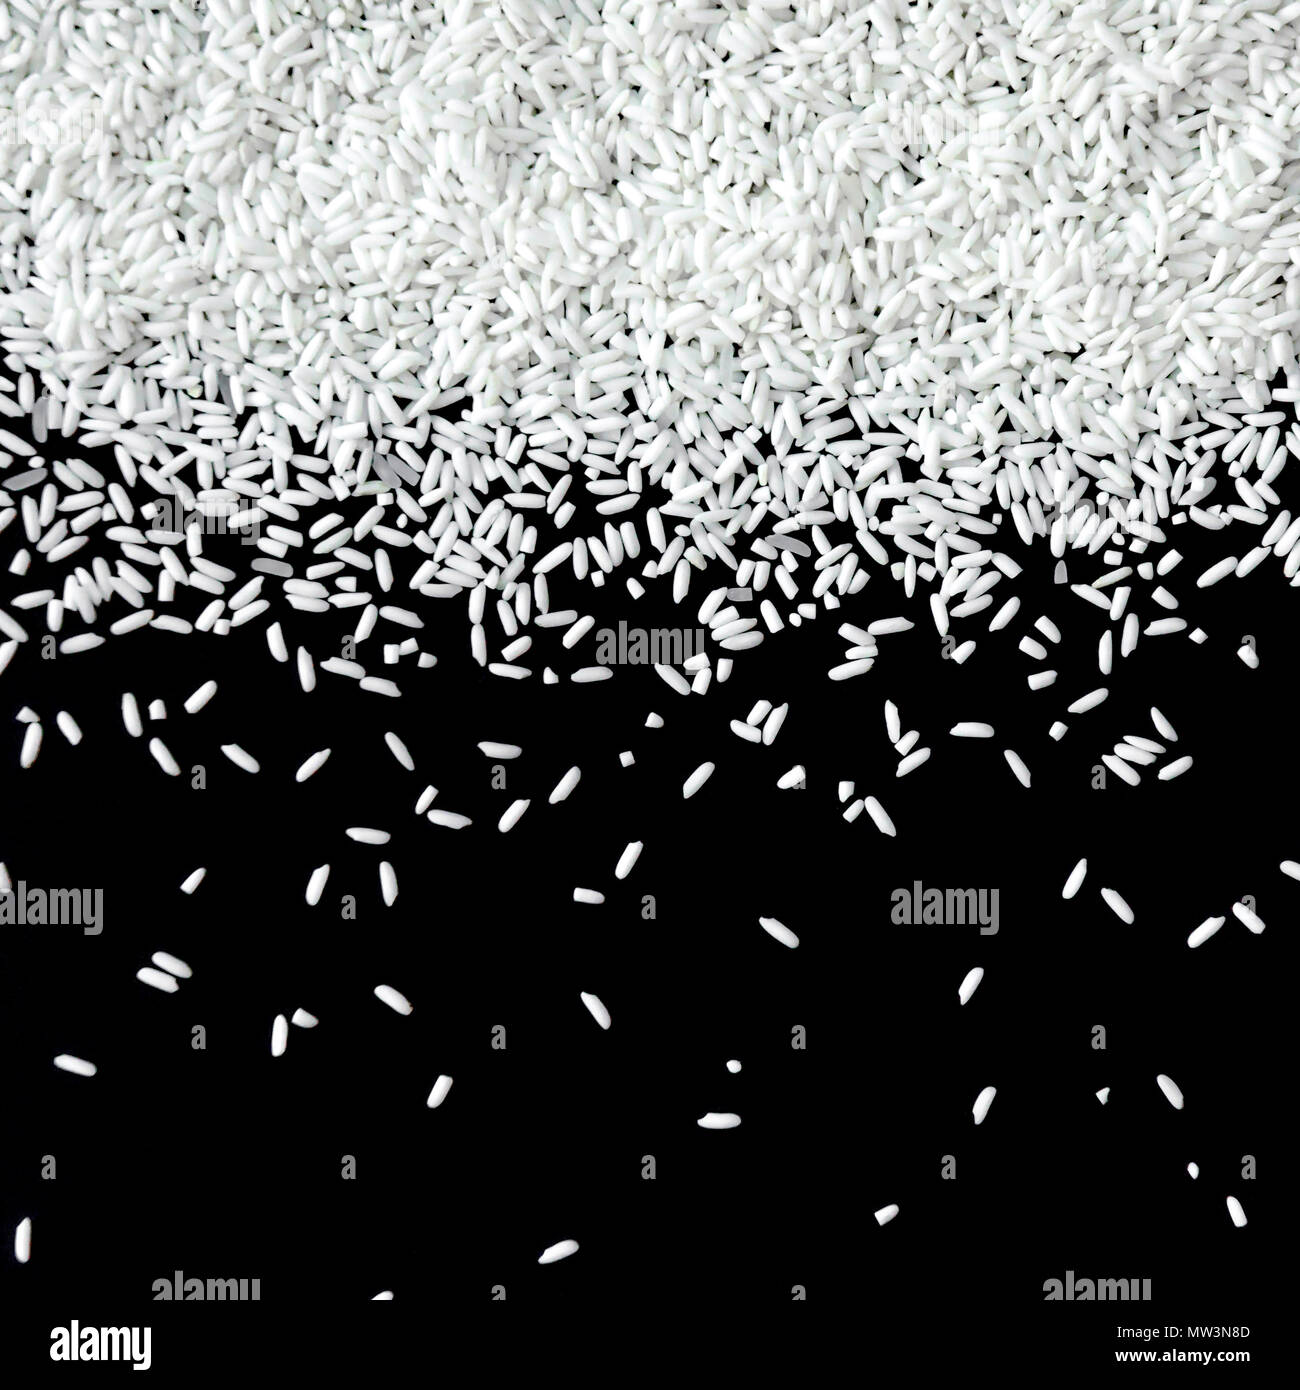 Pile of rice seed on the black background for isolated, Brown of rice grain and close-up of rice pile Stock Photo